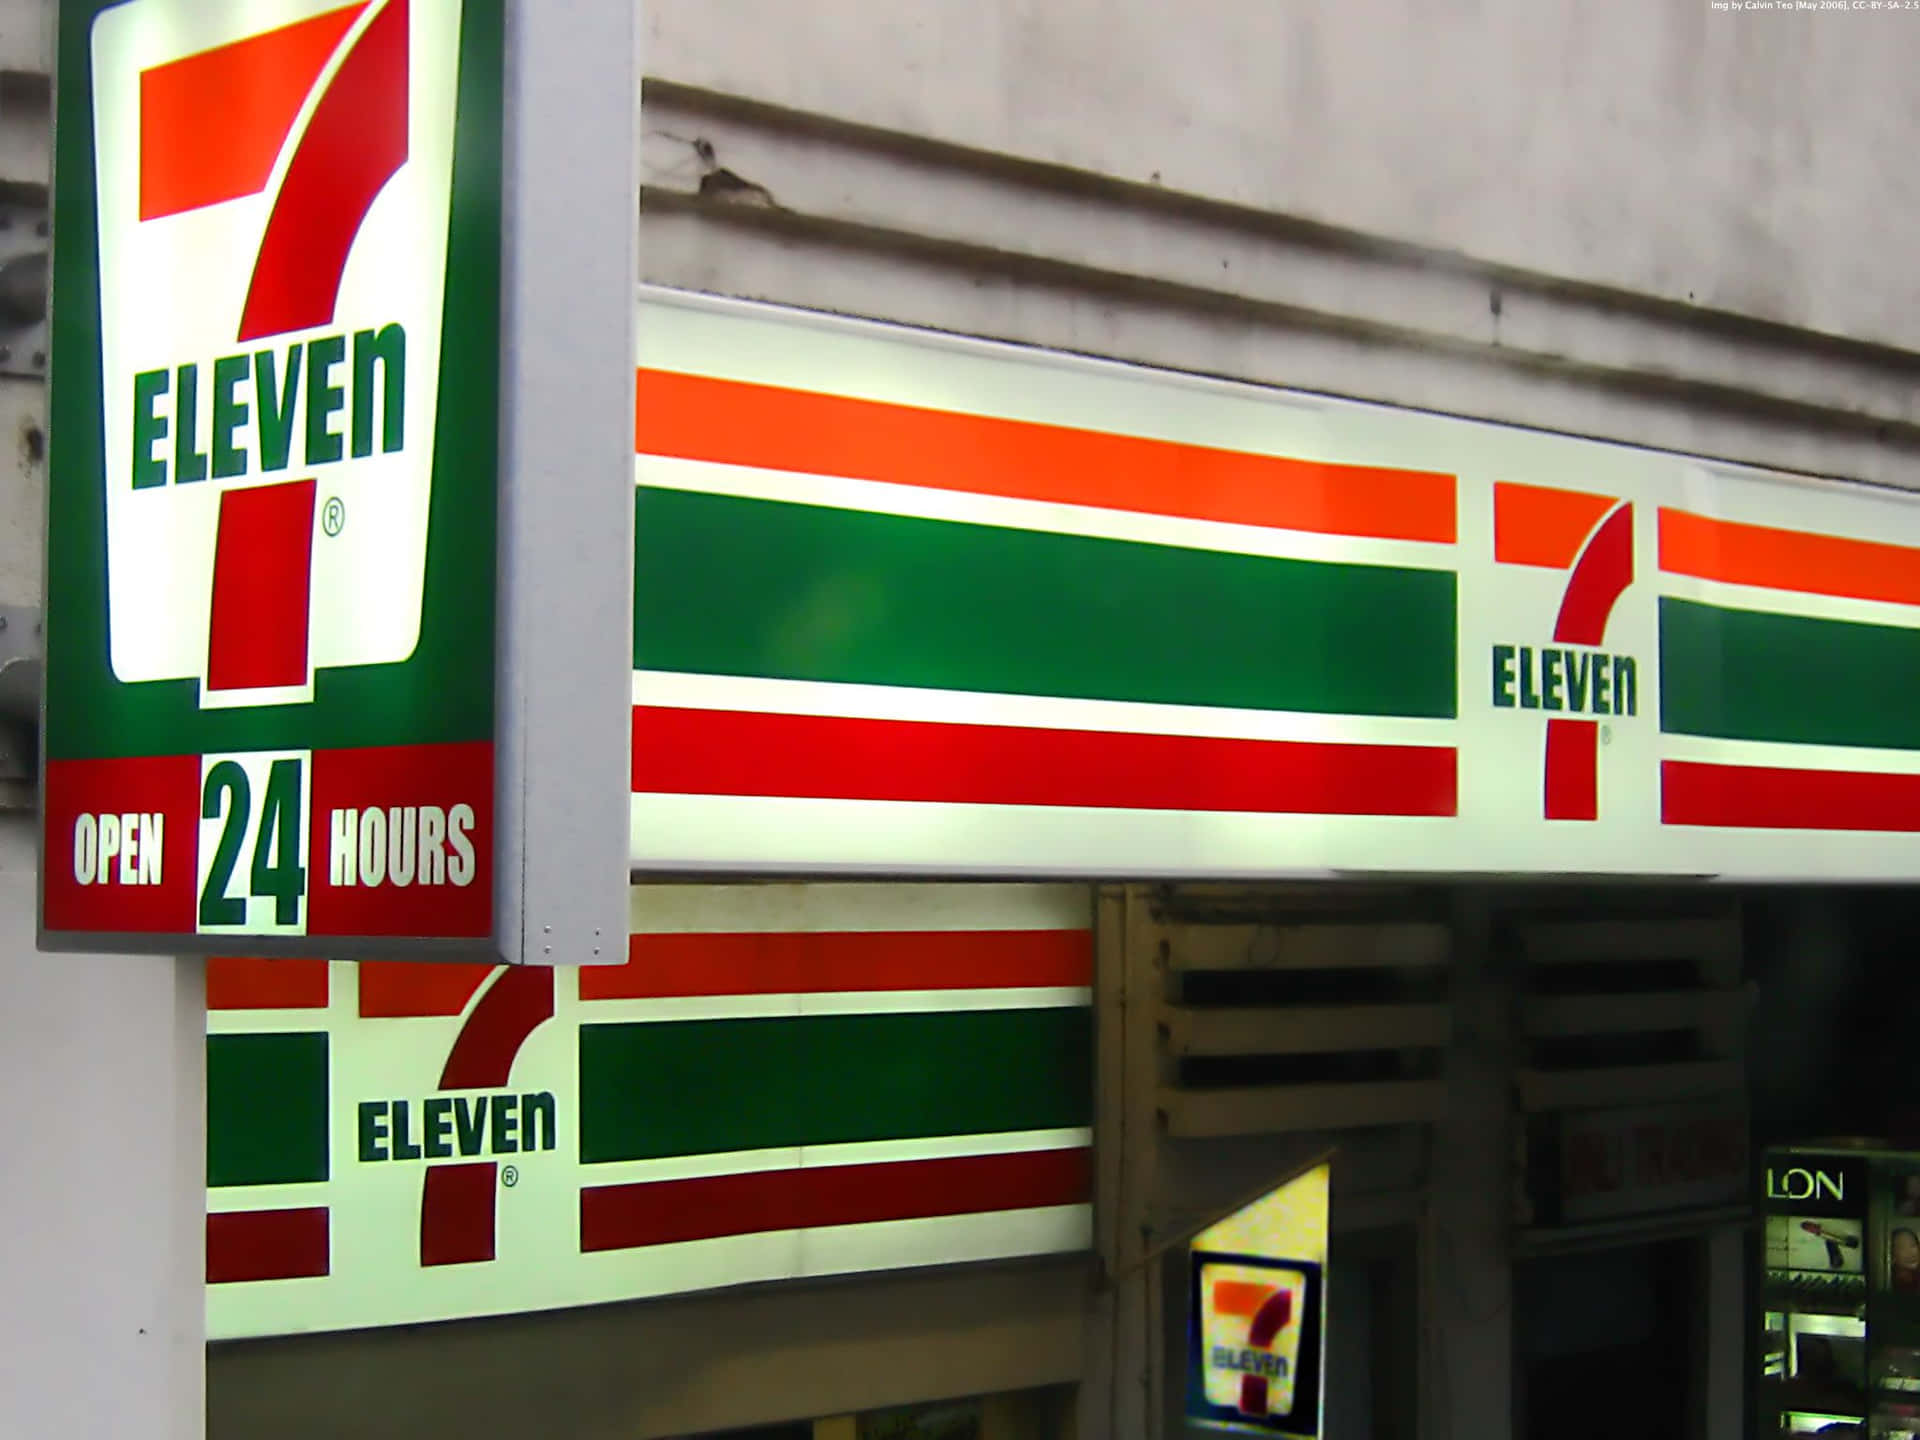 Get your daily fix at 7 Eleven!